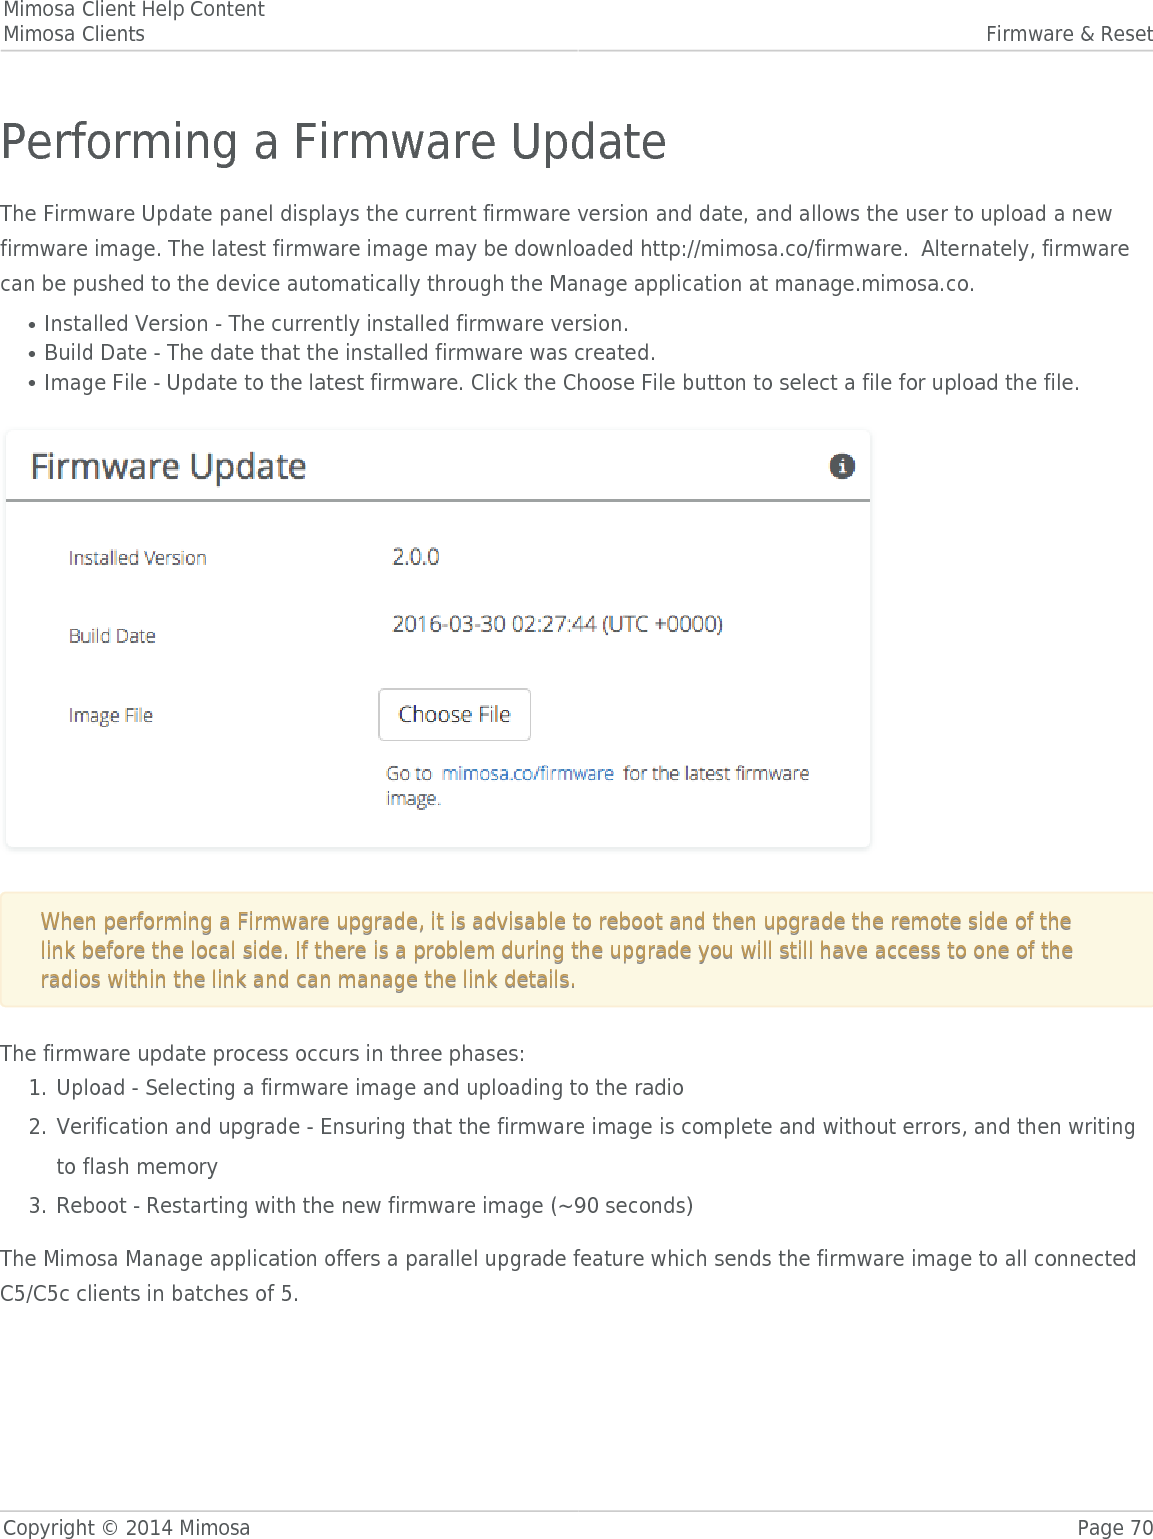 Mimosa Client Help ContentMimosa Clients Firmware &amp; ResetCopyright © 2014 Mimosa Page 70Performing a Firmware UpdateThe Firmware Update panel displays the current firmware version and date, and allows the user to upload a newfirmware image. The latest firmware image may be downloaded http://mimosa.co/firmware.  Alternately, firmwarecan be pushed to the device automatically through the Manage application at manage.mimosa.co.Installed Version - The currently installed firmware version.●Build Date - The date that the installed firmware was created.●Image File - Update to the latest firmware. Click the Choose File button to select a file for upload the file.●  When performing a Firmware upgrade, it is advisable to reboot and then upgrade the remote side of theWhen performing a Firmware upgrade, it is advisable to reboot and then upgrade the remote side of thelink before the local side. If there is a problem during the upgrade you will still have access to one of thelink before the local side. If there is a problem during the upgrade you will still have access to one of theradios within the link and can manage the link details.radios within the link and can manage the link details.The firmware update process occurs in three phases:Upload - Selecting a firmware image and uploading to the radio1.Verification and upgrade - Ensuring that the firmware image is complete and without errors, and then writing2.to flash memoryReboot - Restarting with the new firmware image (~90 seconds)3.The Mimosa Manage application offers a parallel upgrade feature which sends the firmware image to all connectedC5/C5c clients in batches of 5.